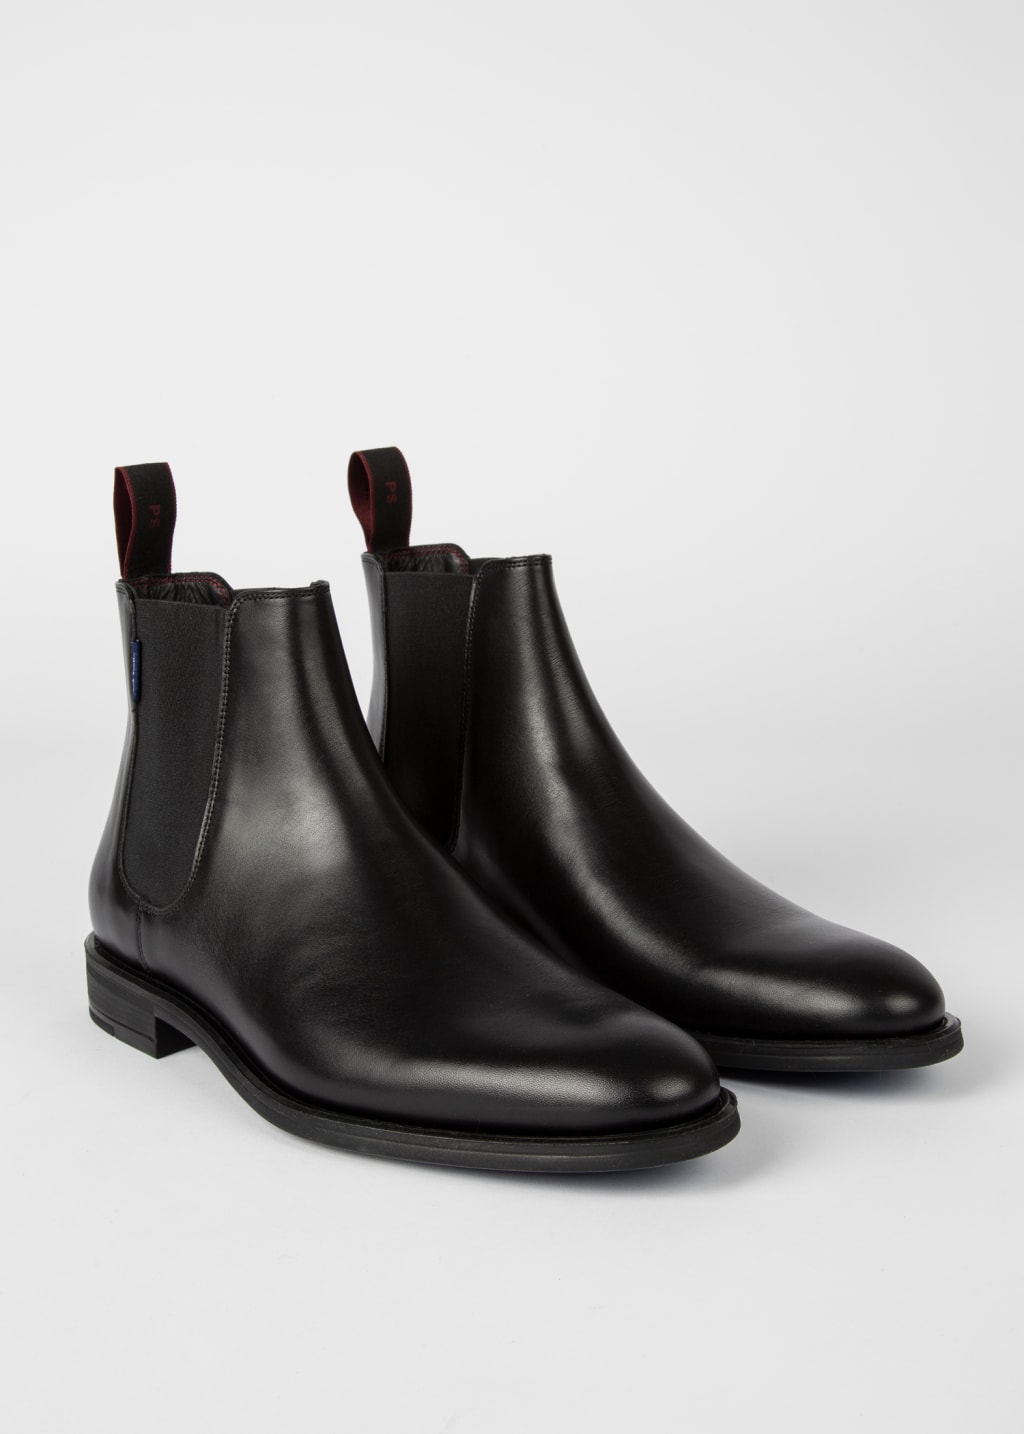 Pair View - Black Leather 'Cedric' Boots Paul Smith